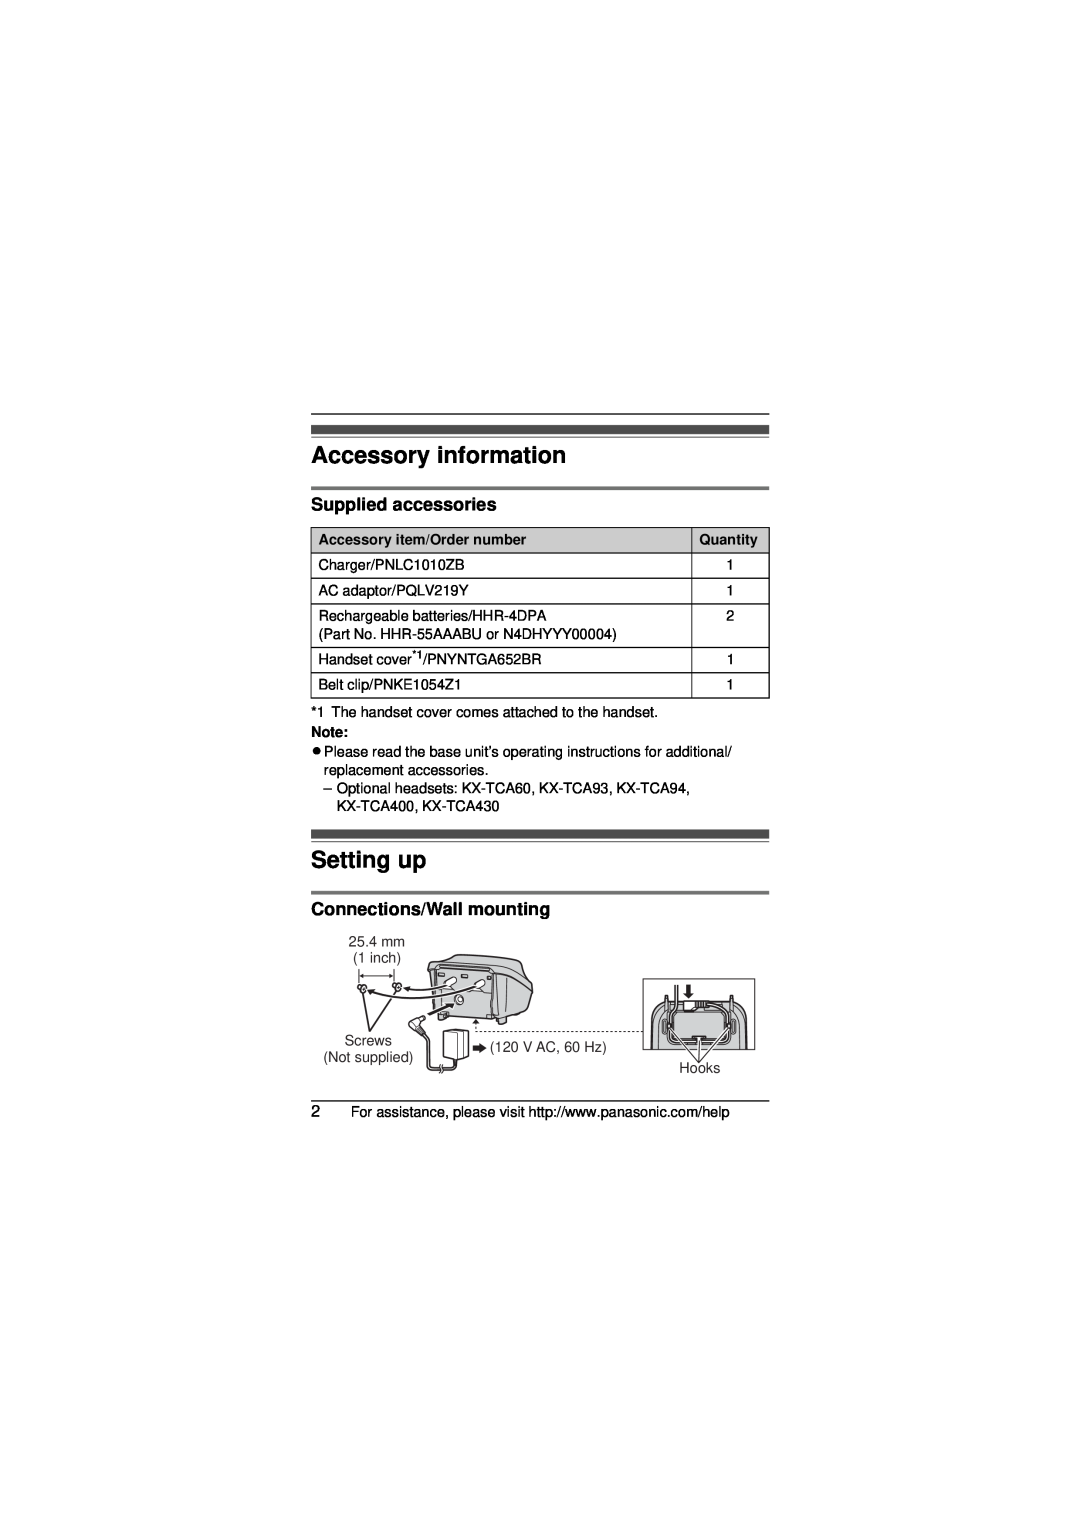 Panasonic KX-TG6521 Accessory information, Setting up, Supplied accessories, Connections/Wall mounting, Quantity 